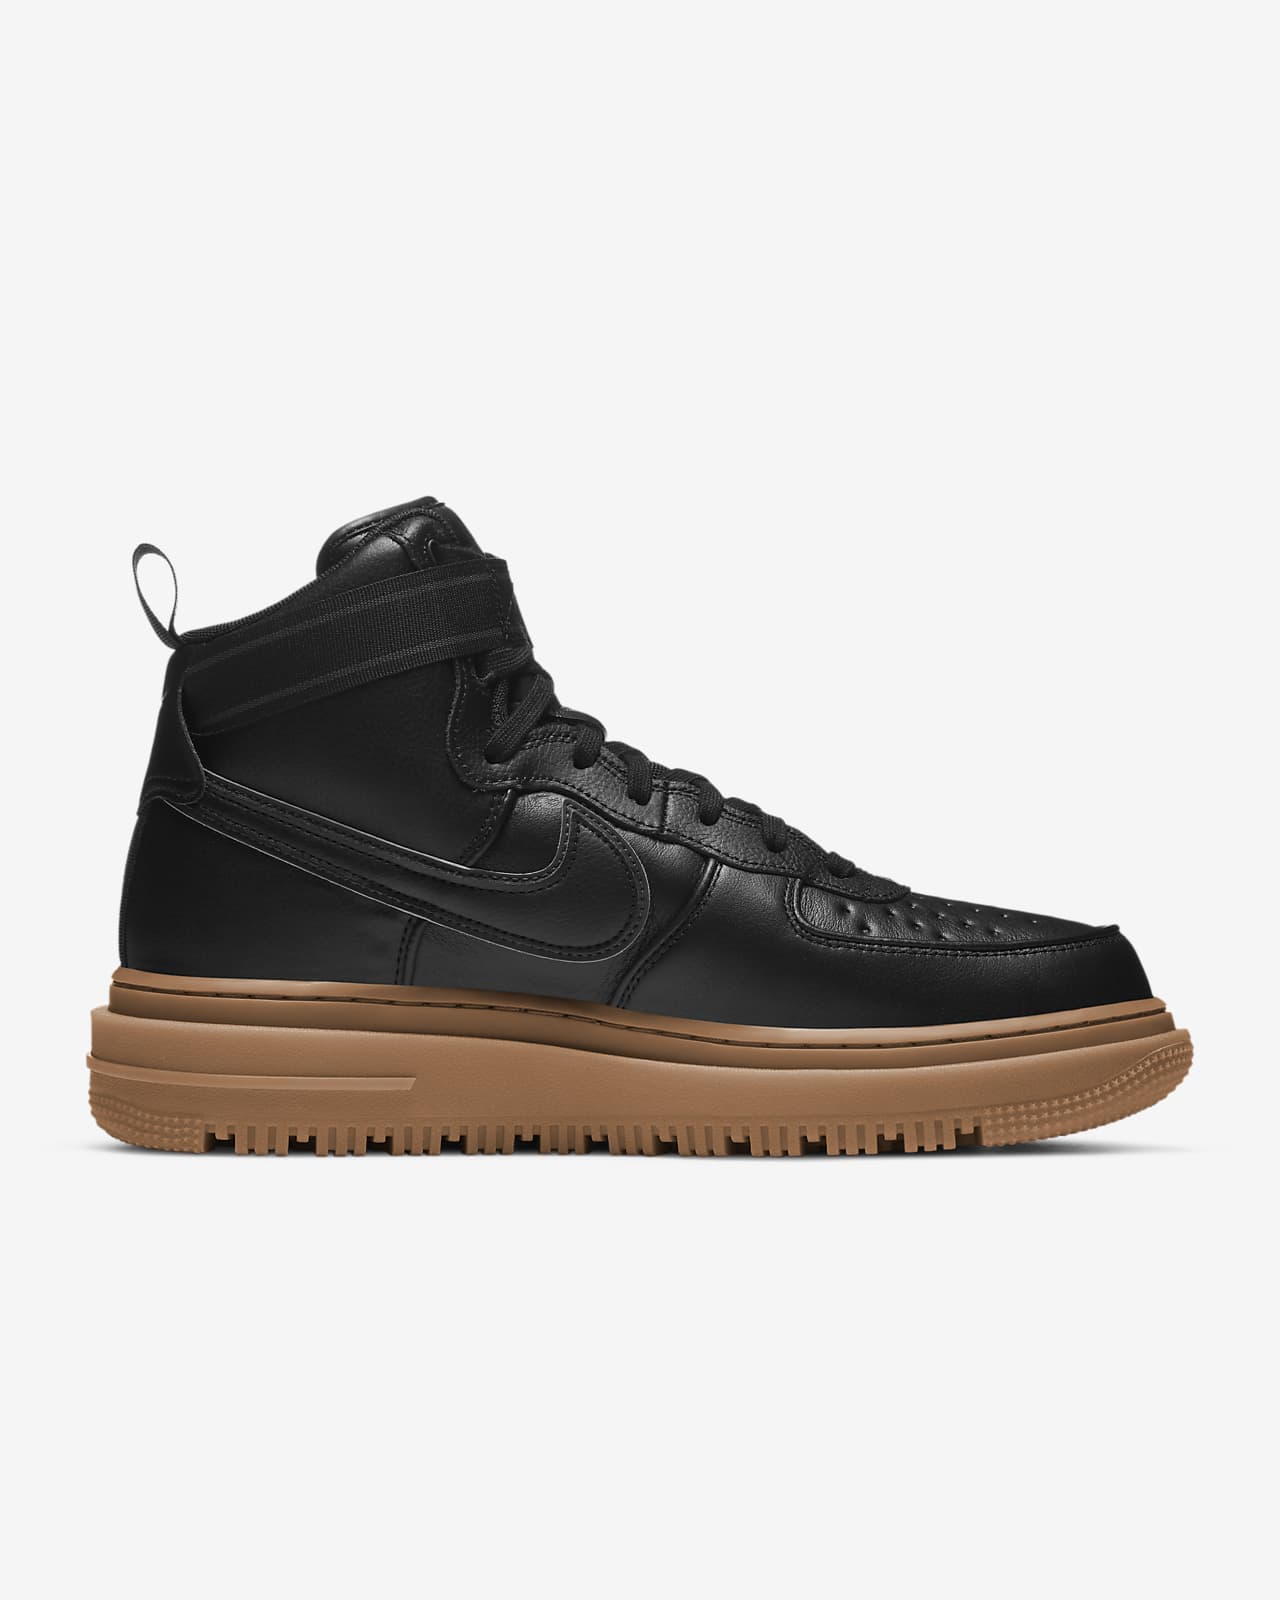 nike air force boots price